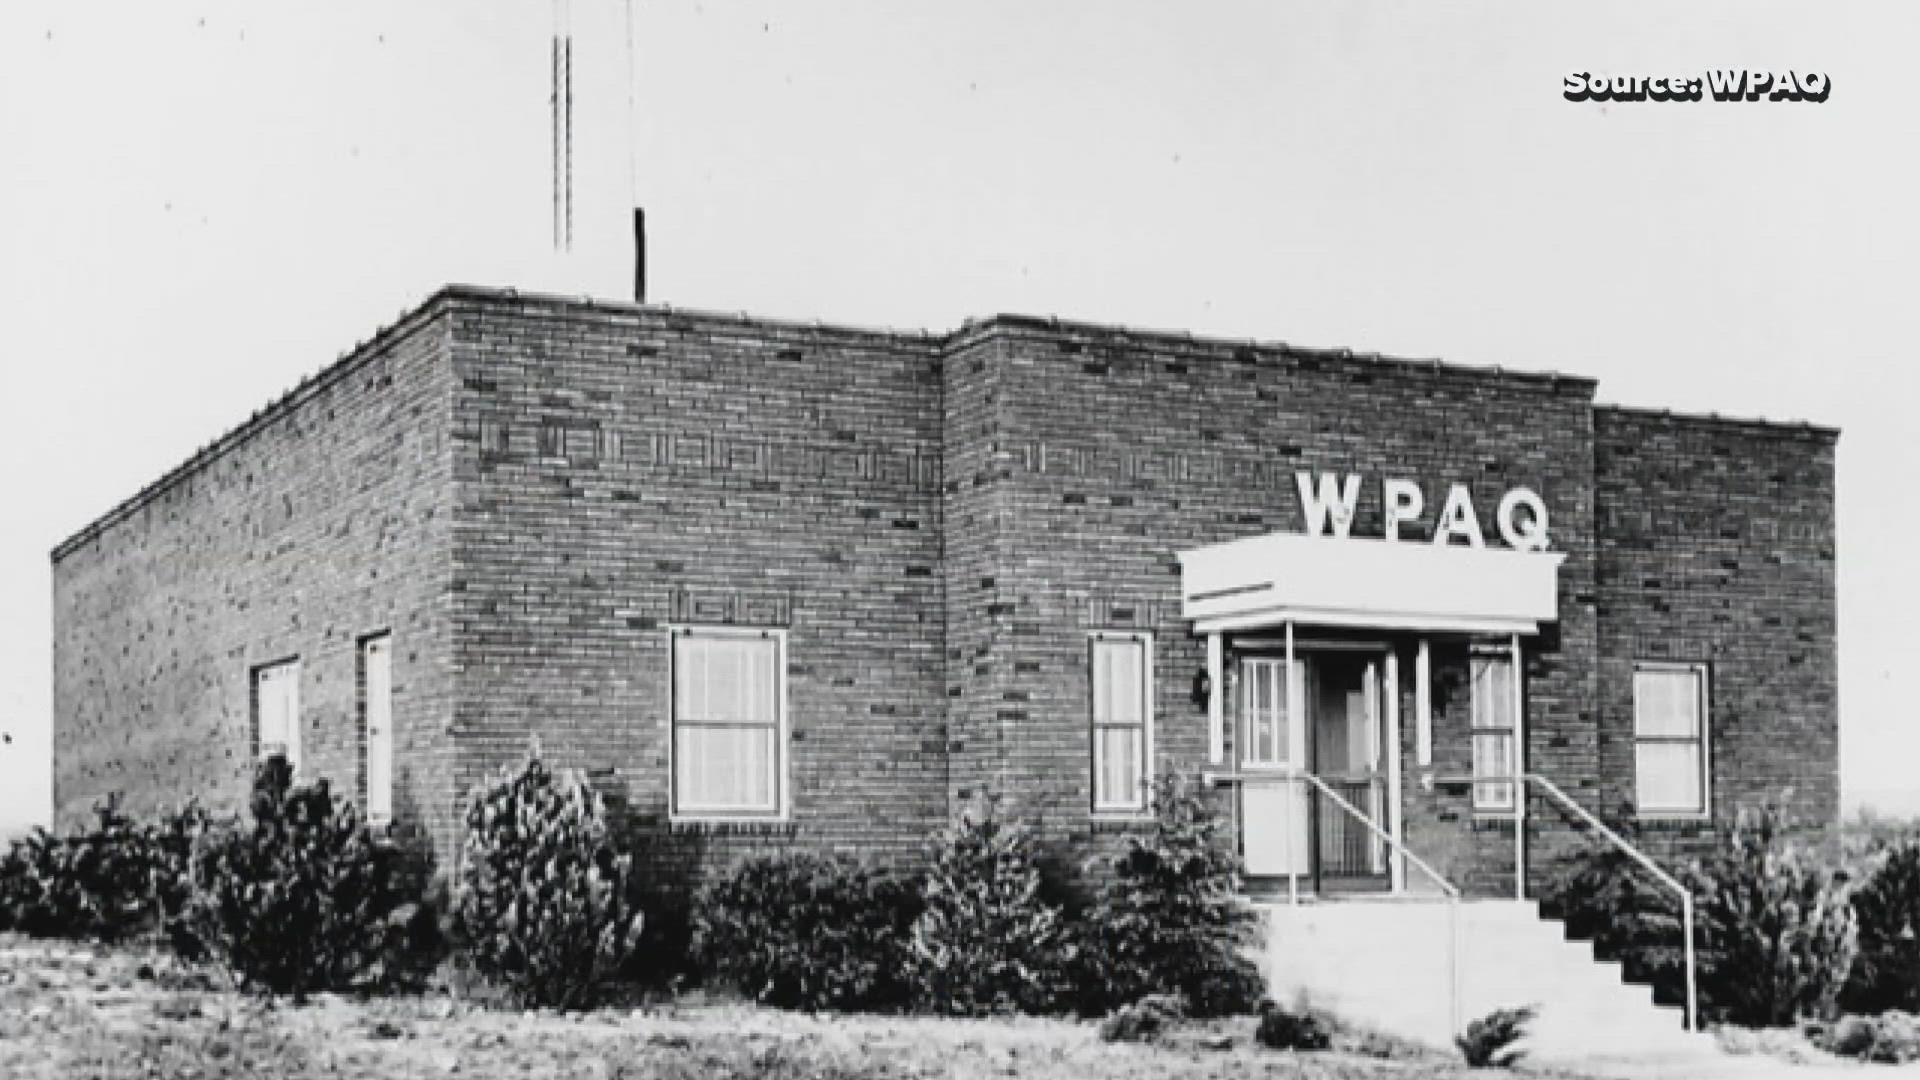 WPAQ has been on the air for more than six decades and doesn't plan on slowing down anytime soon.